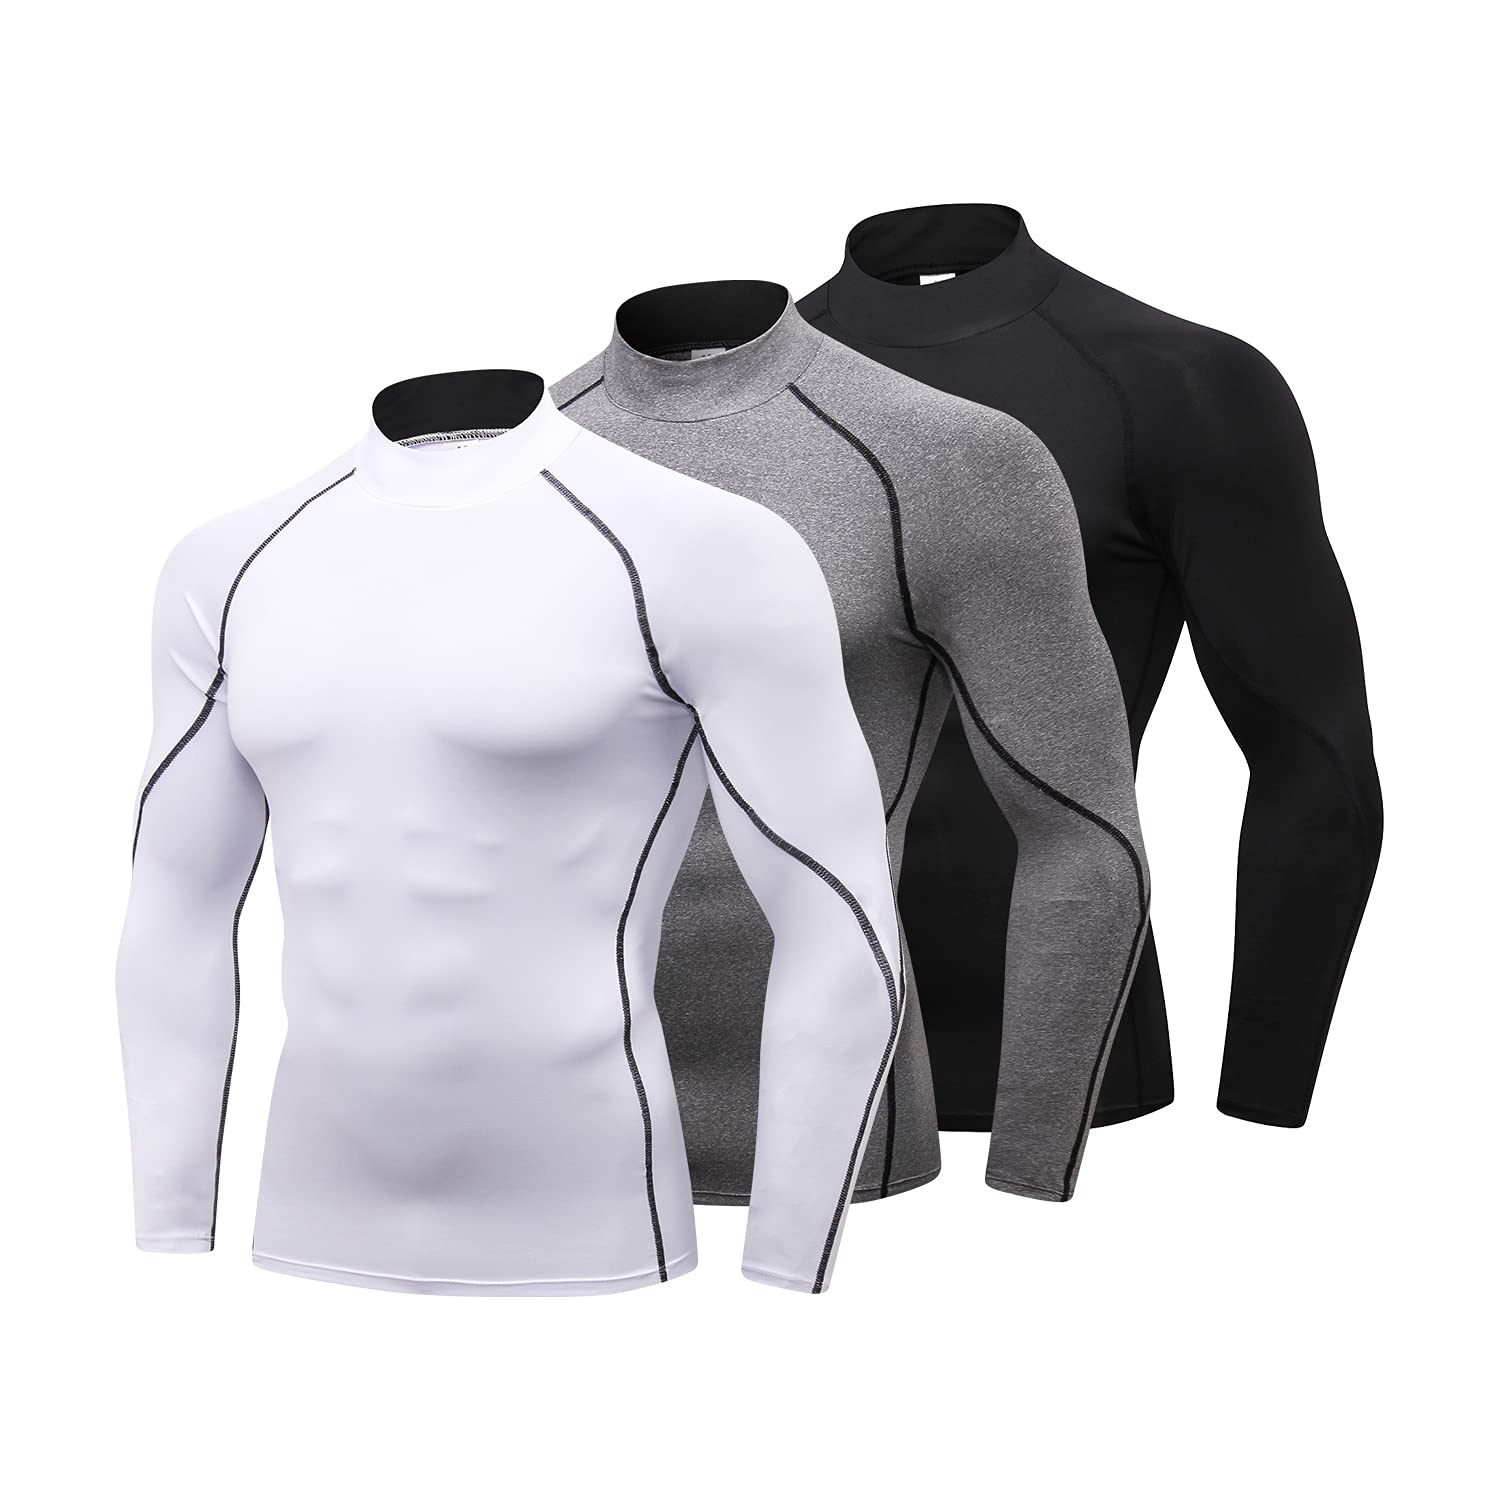 3 Pack Mens Mock Turtleneck Compression Shirts Long Sleeve Sun Protection  Shirts Cooling Workout Gym Tops Undershirt Blkgry+grey+white Large